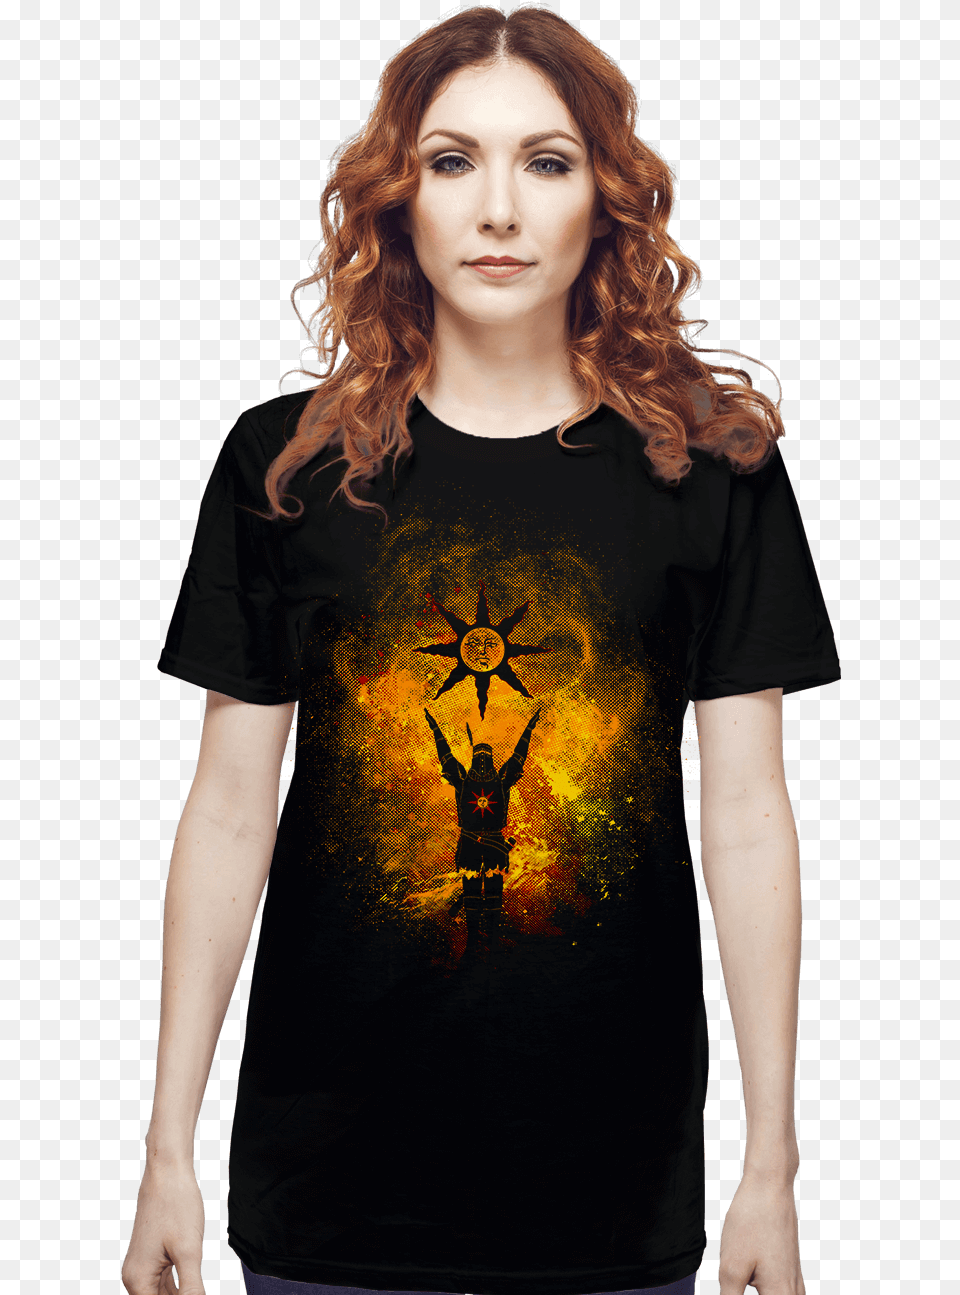 Praise The Sun Shirt, T-shirt, Clothing, Adult, Person Png Image